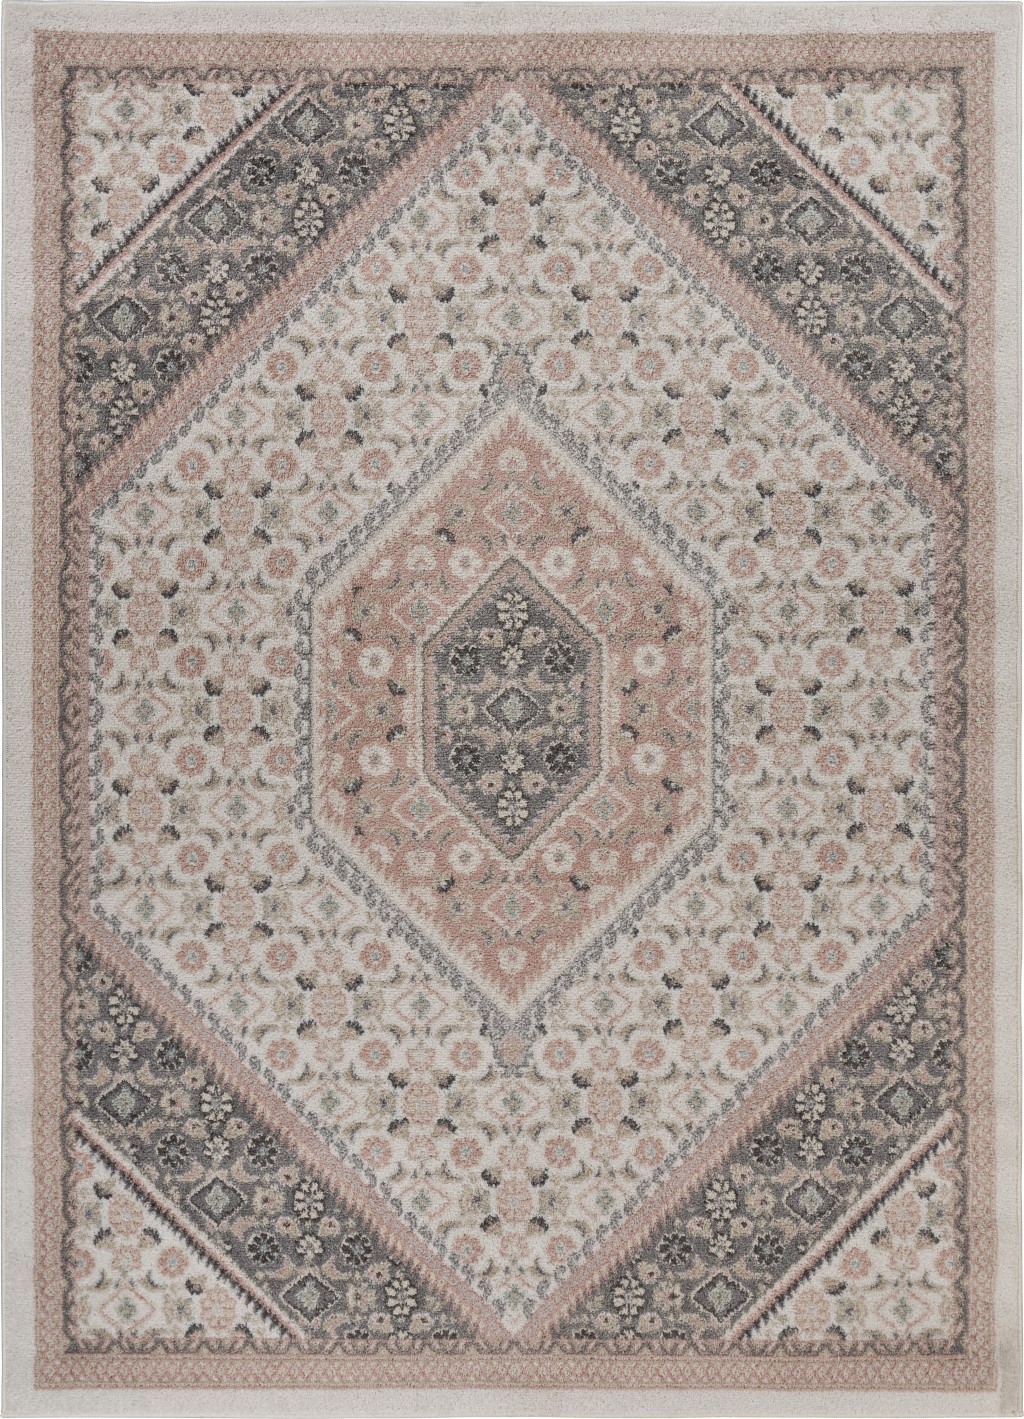 8' X 10' Gray And Brown Dhurrie Area Rug-395599-1